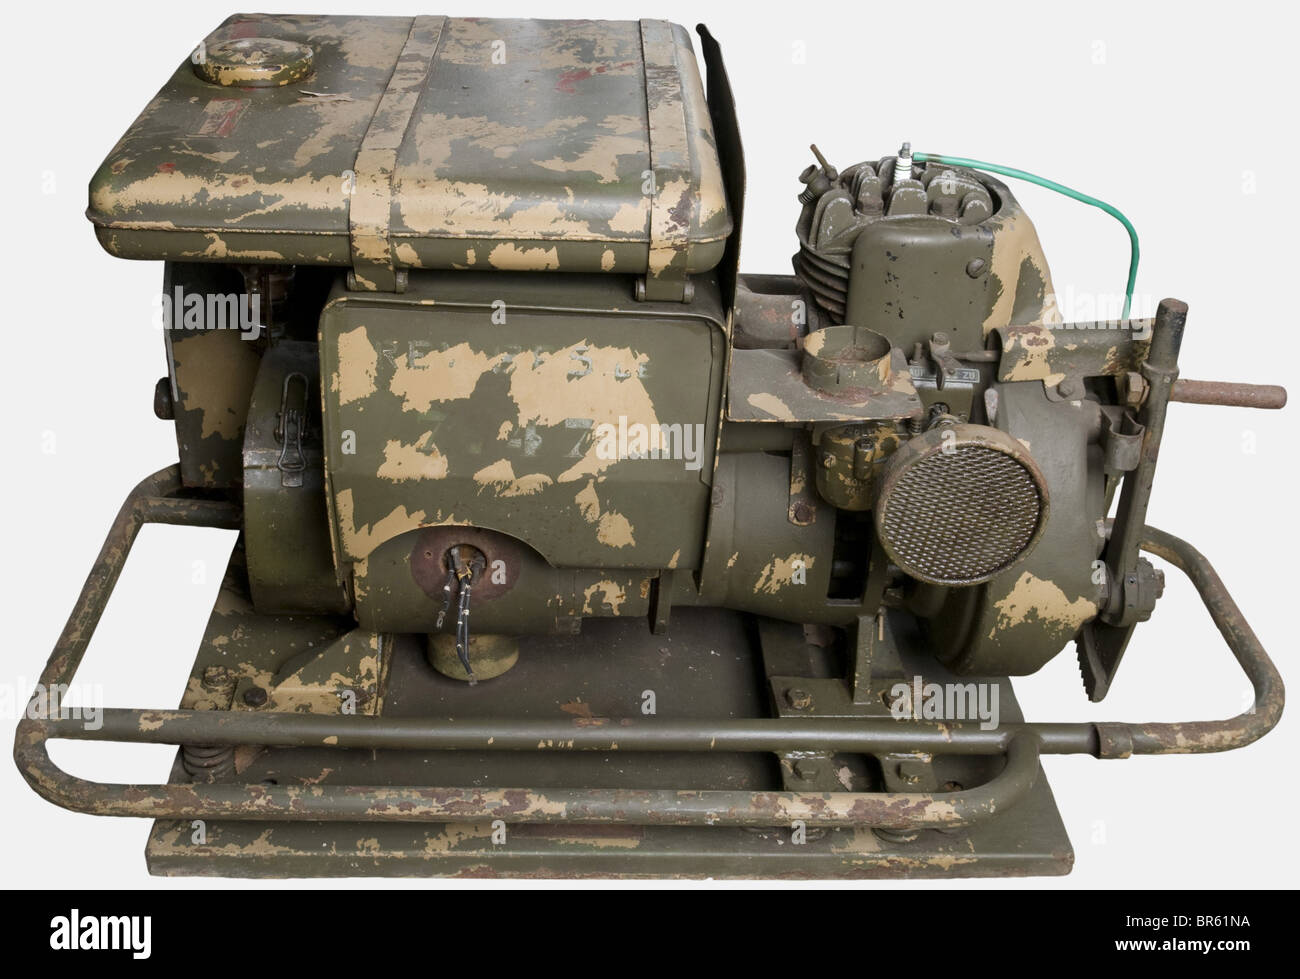 A Wehrmacht generator, big pattern, most probably made by 'Auto Union', two-tone camouflage paint, complete with its accessories (carburettor and tank). historic, historical, 1930s, 1930s, 20th century, technical, technic, material, materials, device, devices, equipment, equipments, utensil, piece of equipment, utensils, technology, militaria, military, object, objects, stills, clipping, clippings, cut out, cut-out, cut-outs, Stock Photo